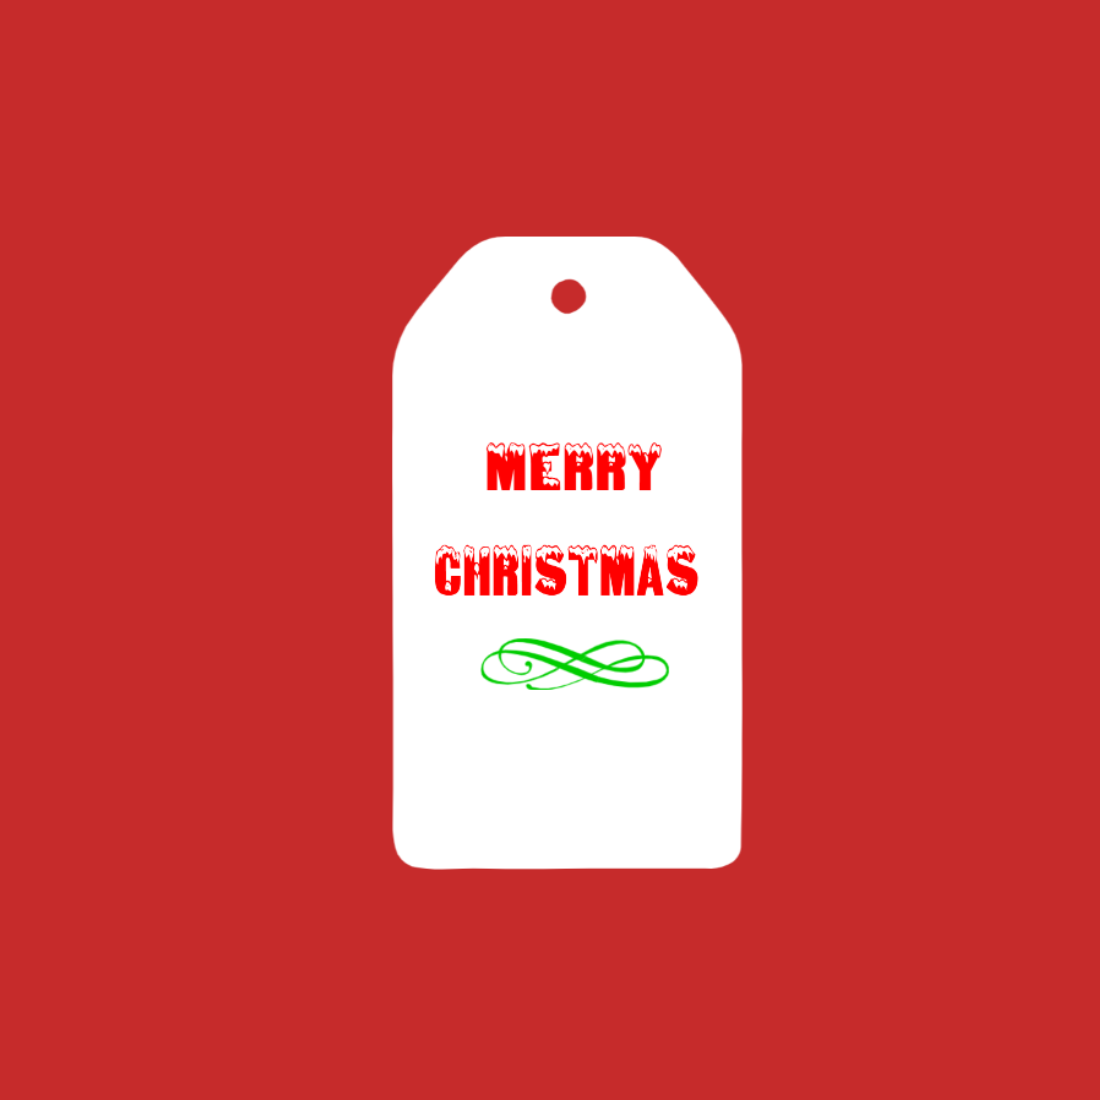 Merry Christmas Gift Tags Design pinterest image.